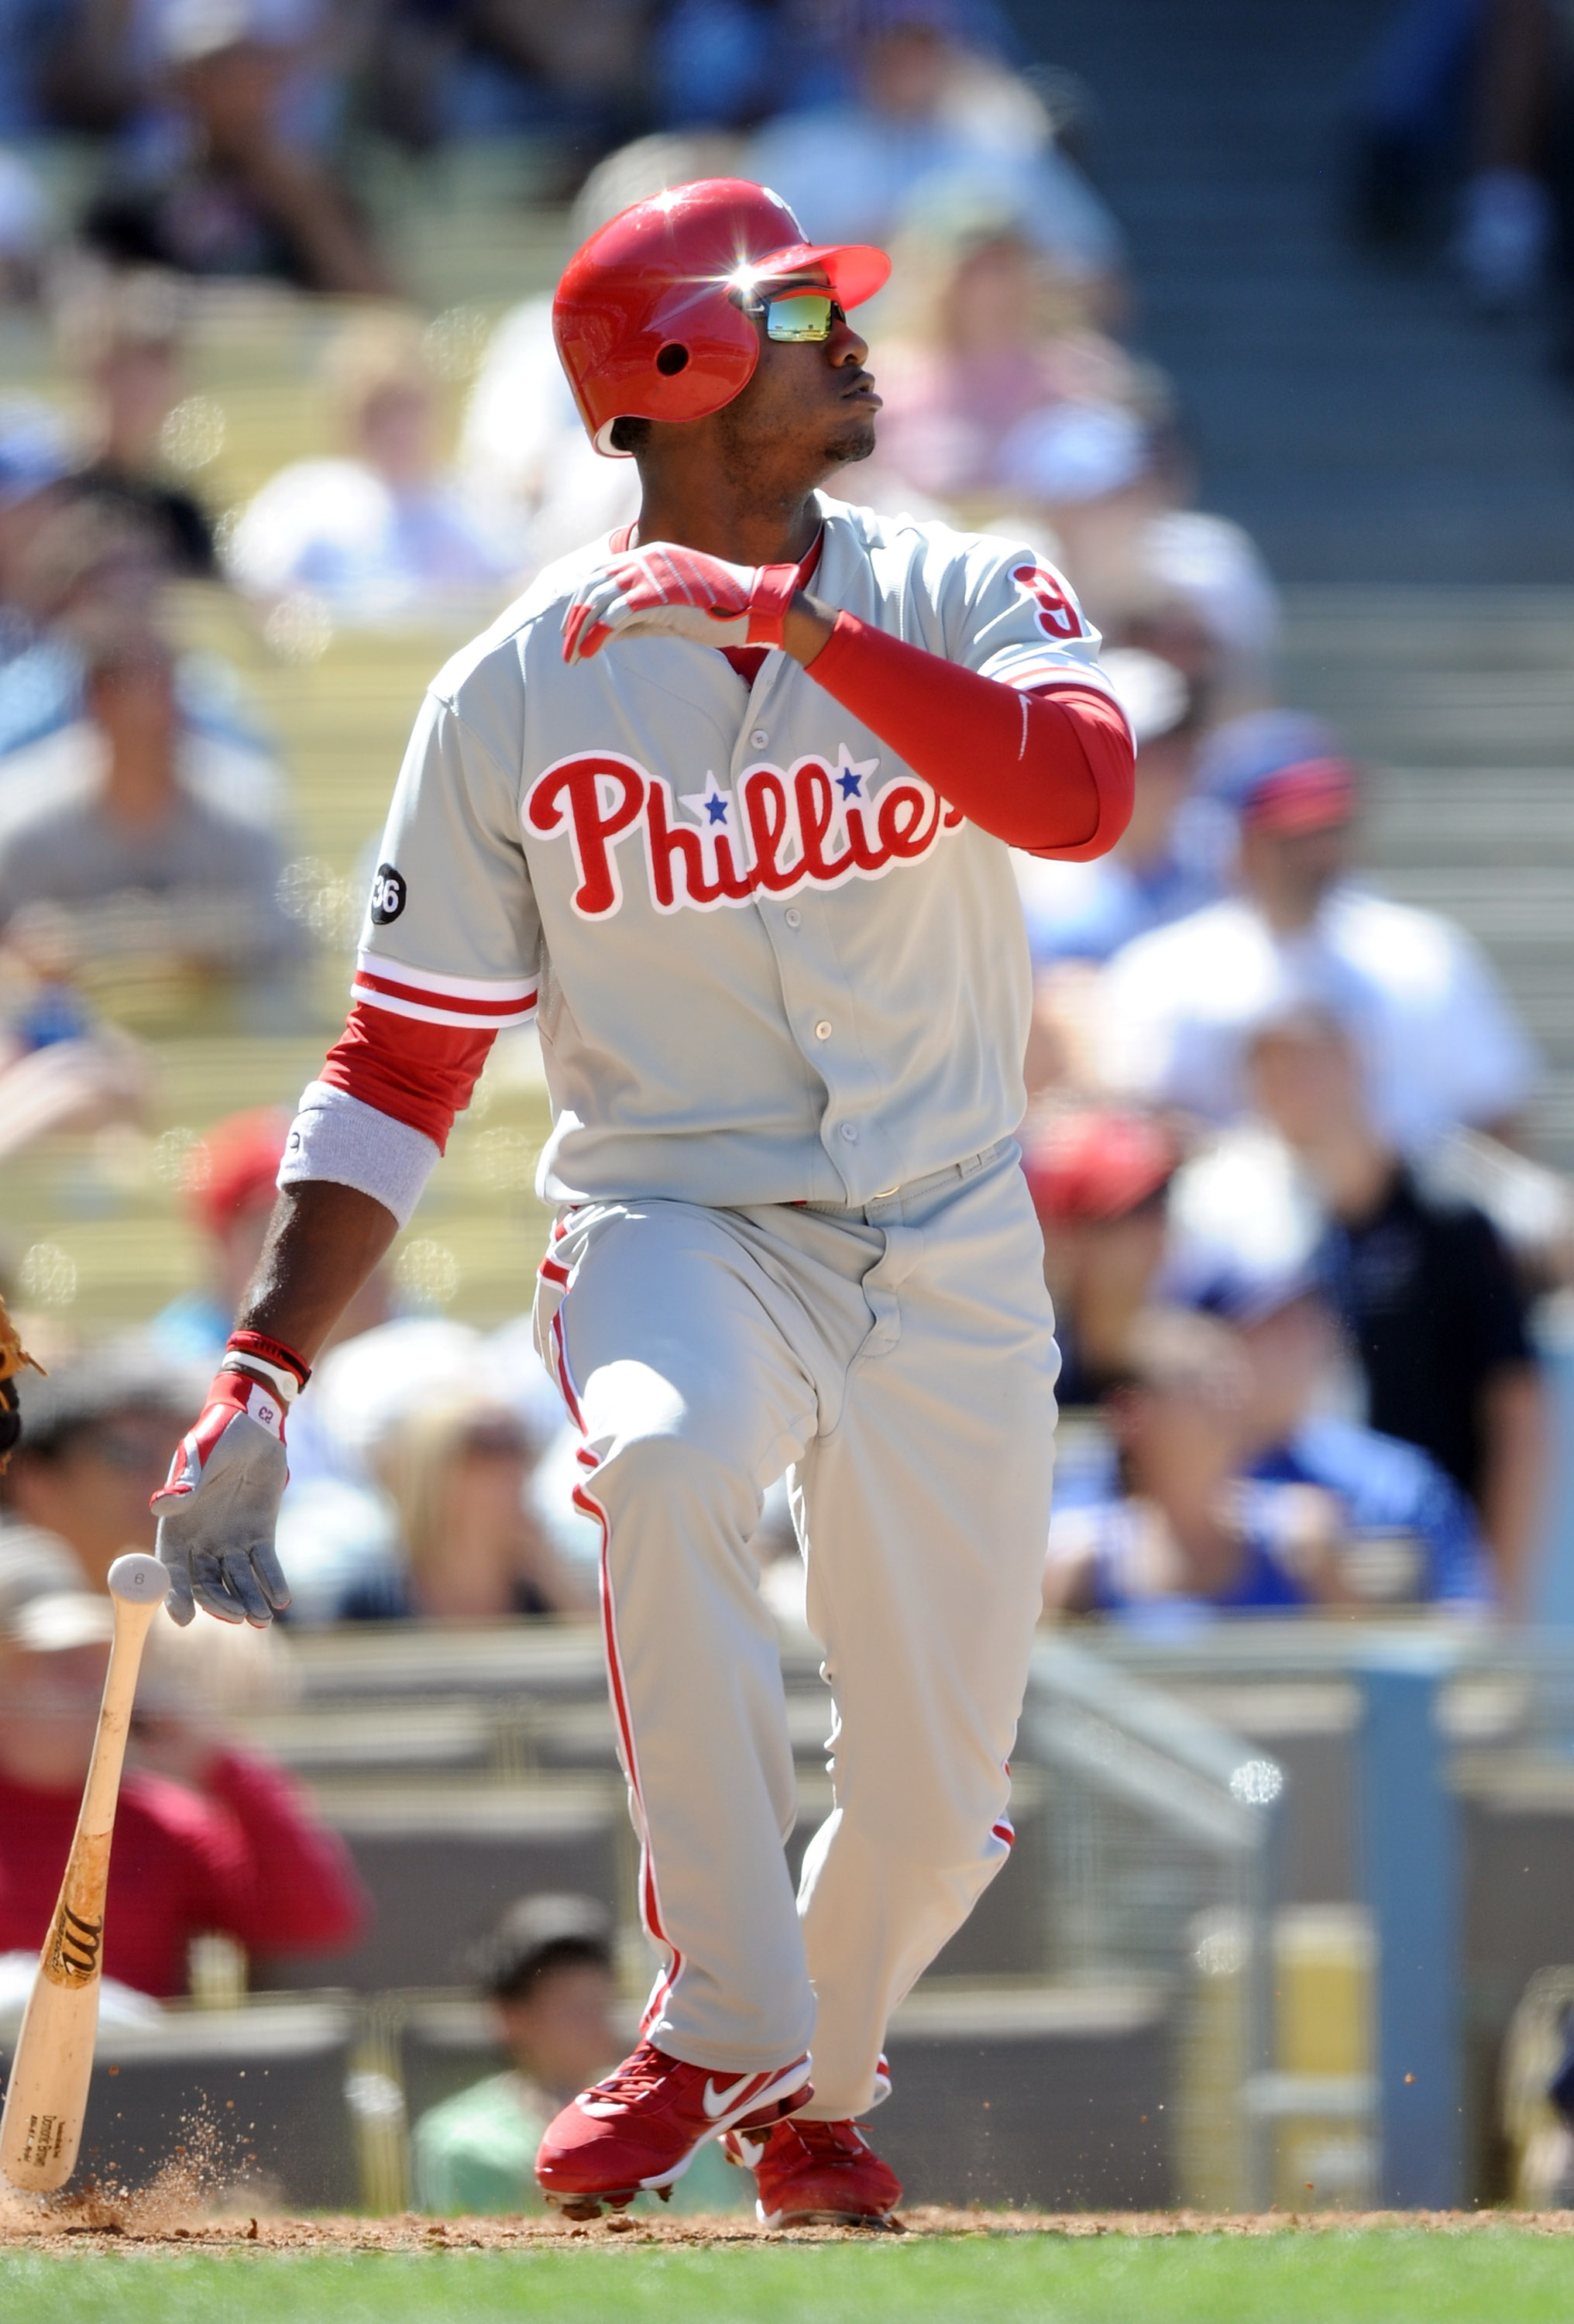 Phillies outfielder Grady Sizemore has chance to show his power